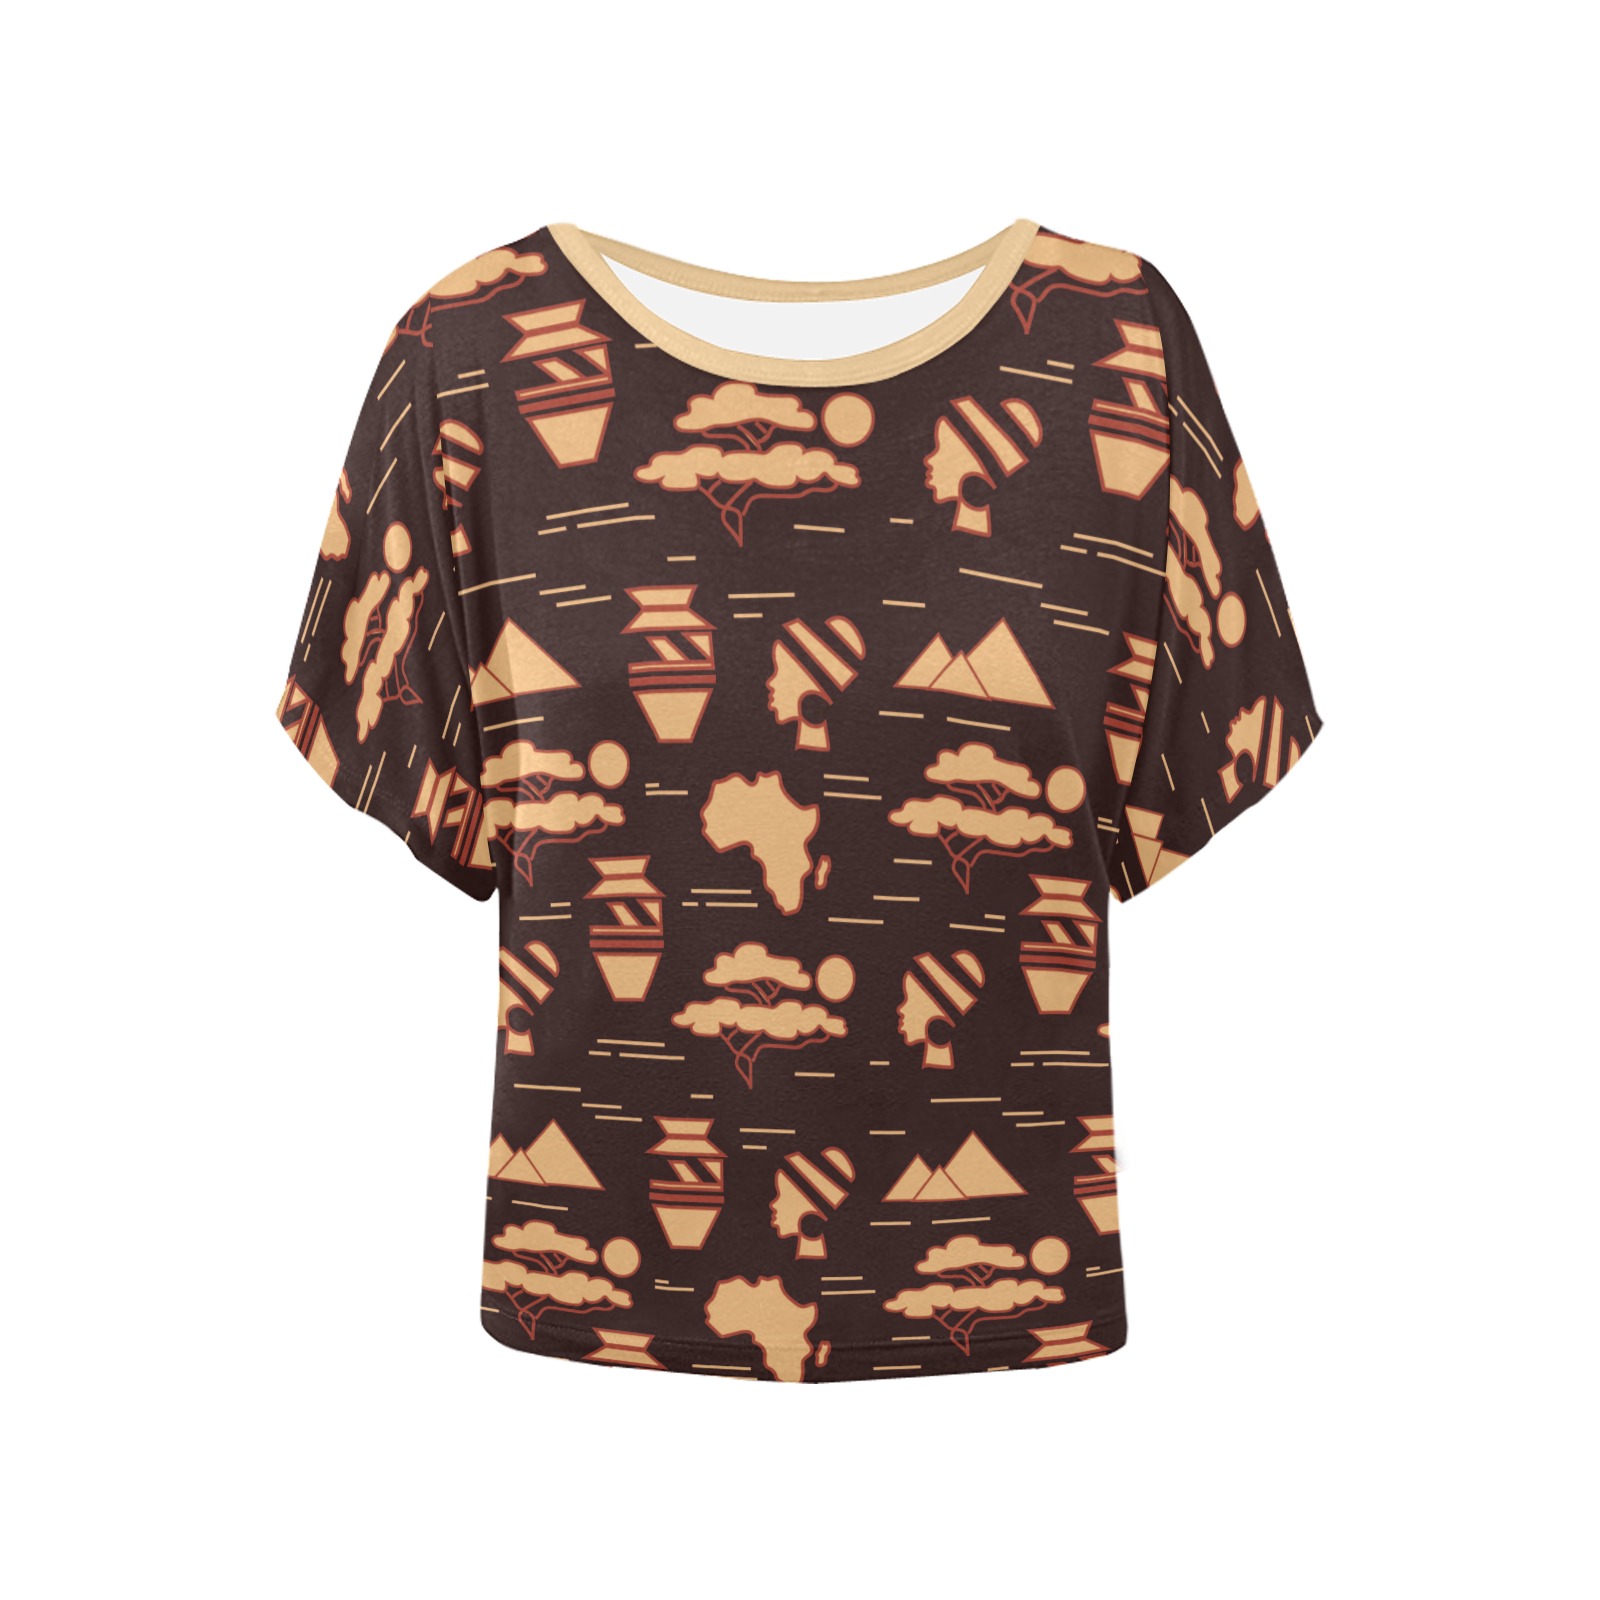 African patterns -20 Women's Batwing-Sleeved Blouse T shirt (Model T44)